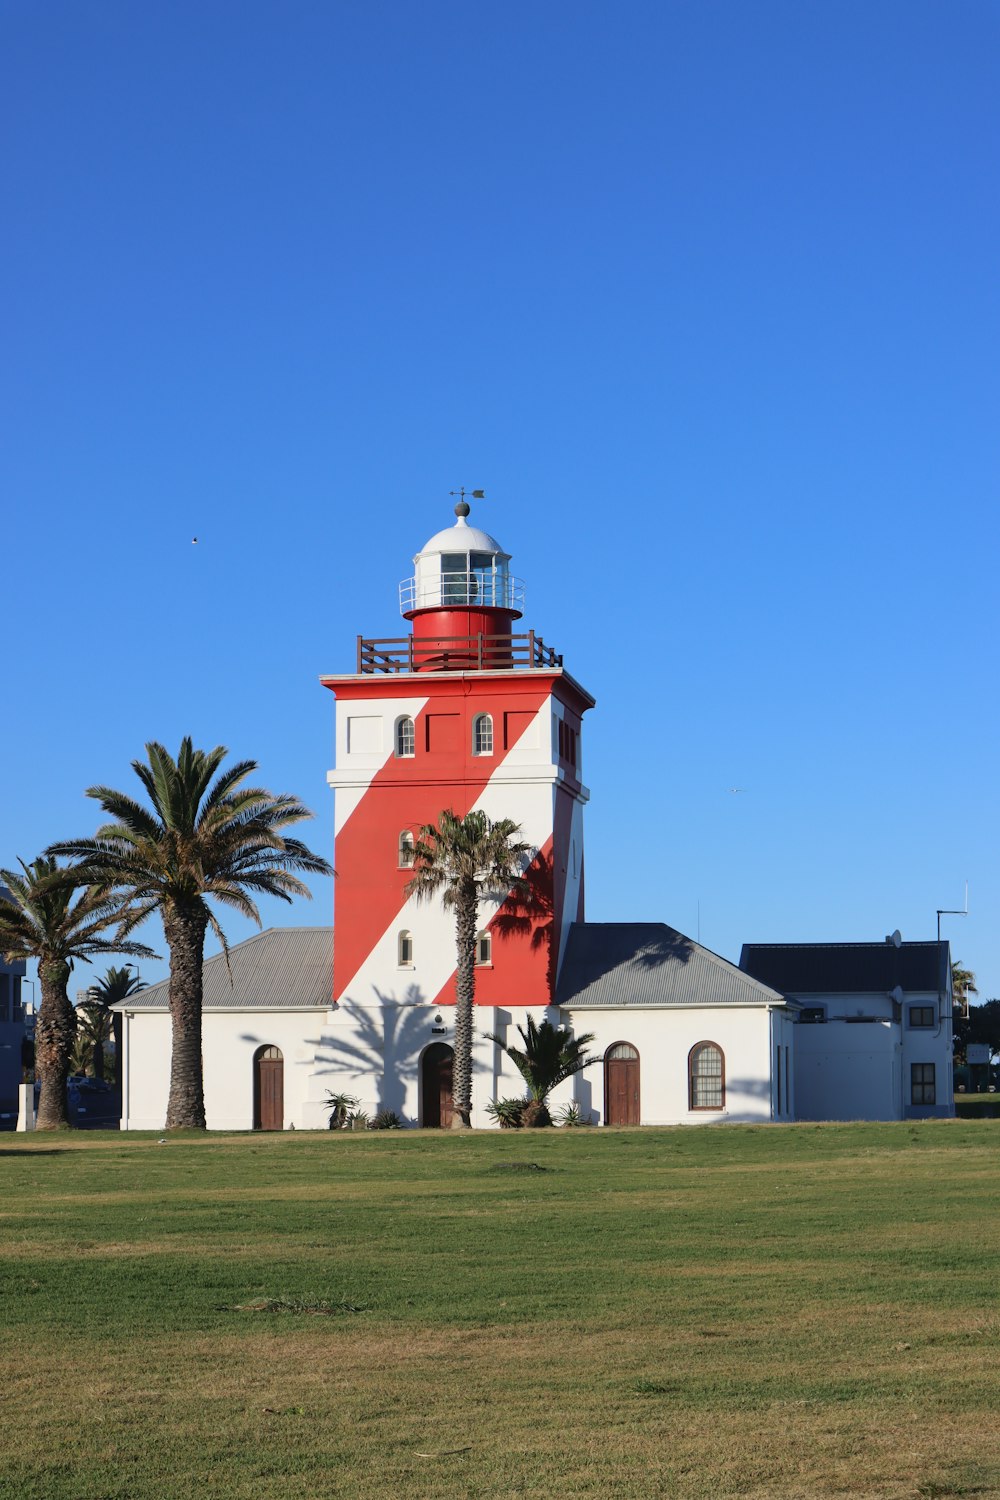 a red and white lighthouse with palm trees in the foreground